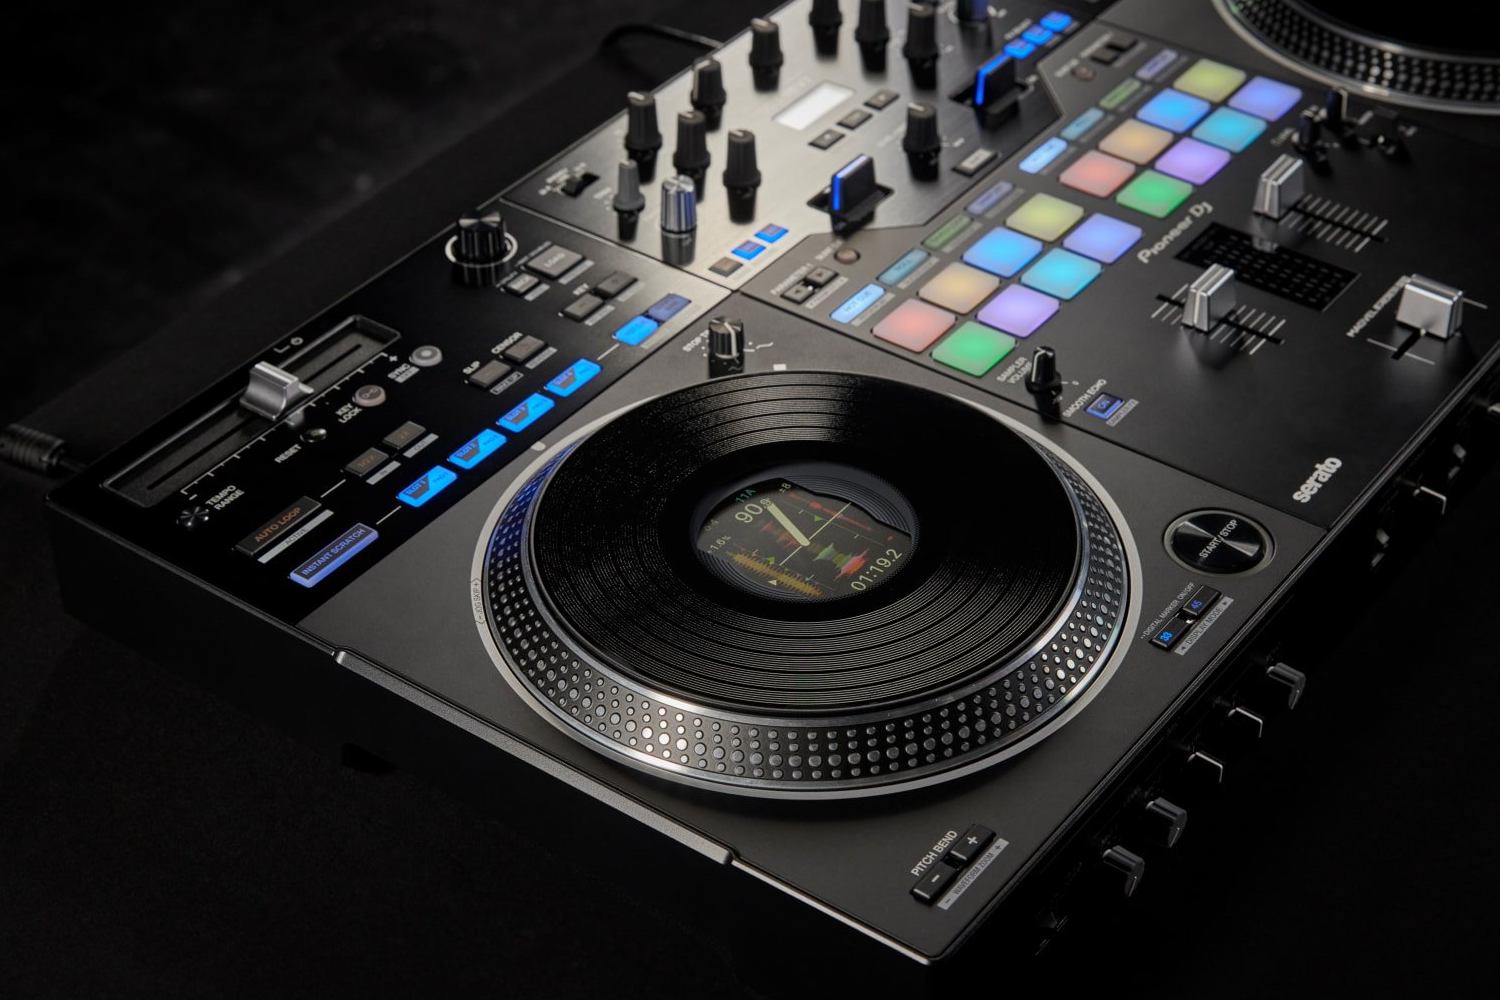 Sharpening the tools with the Pioneer DJ DDJ-REV7